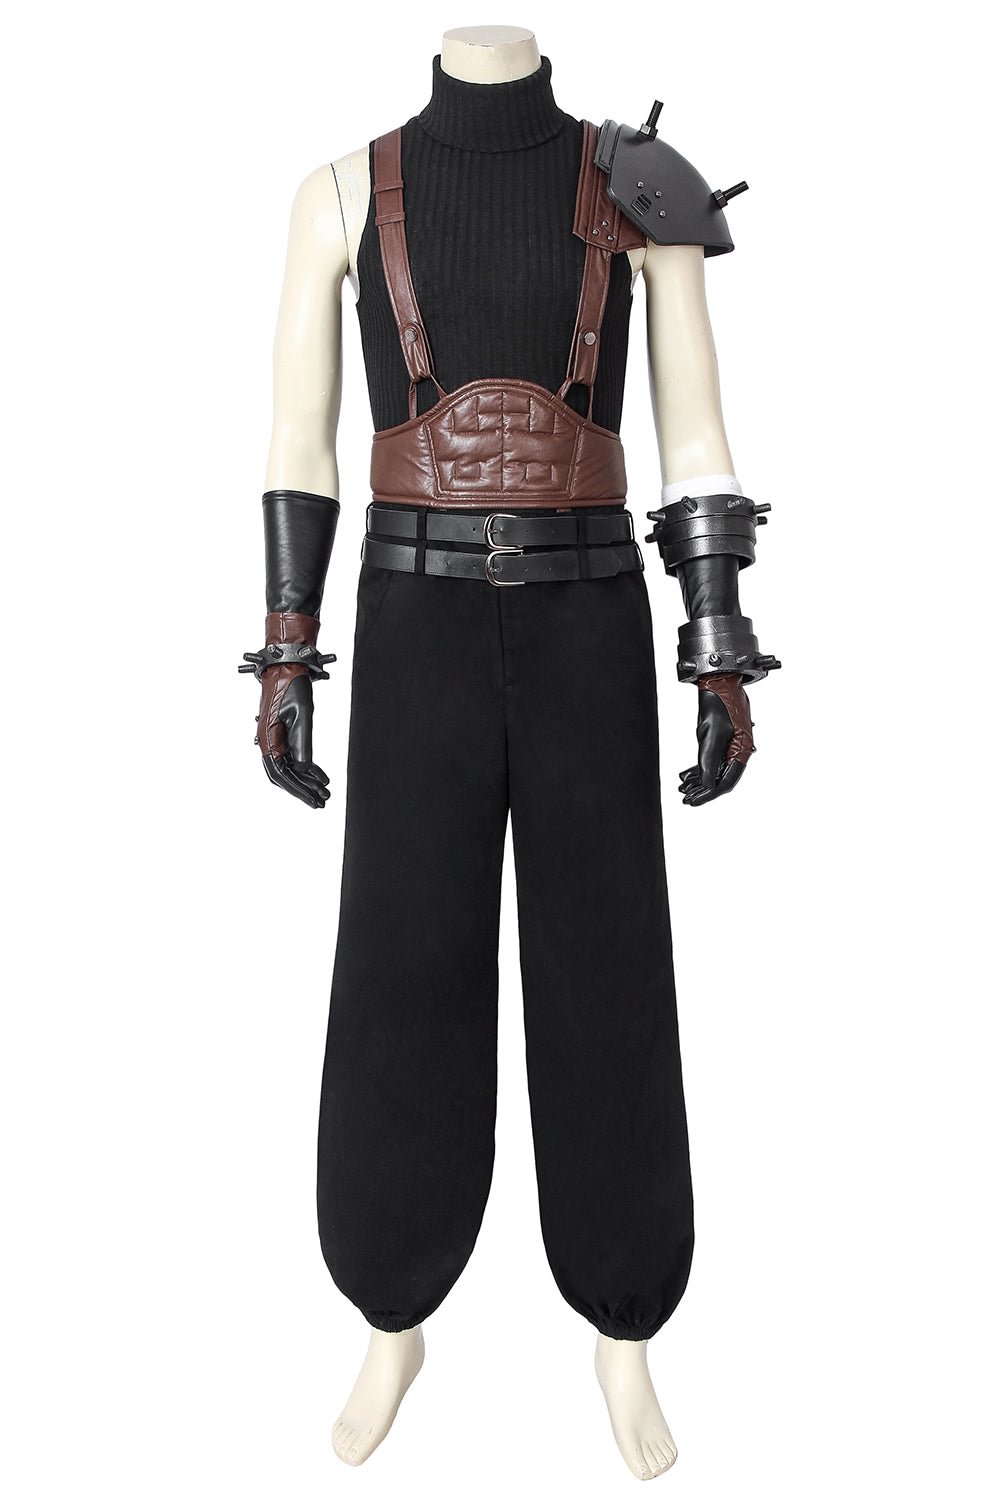 FFVII Cloud Strife Outfit Final Fantasy VII Cosplay Costume